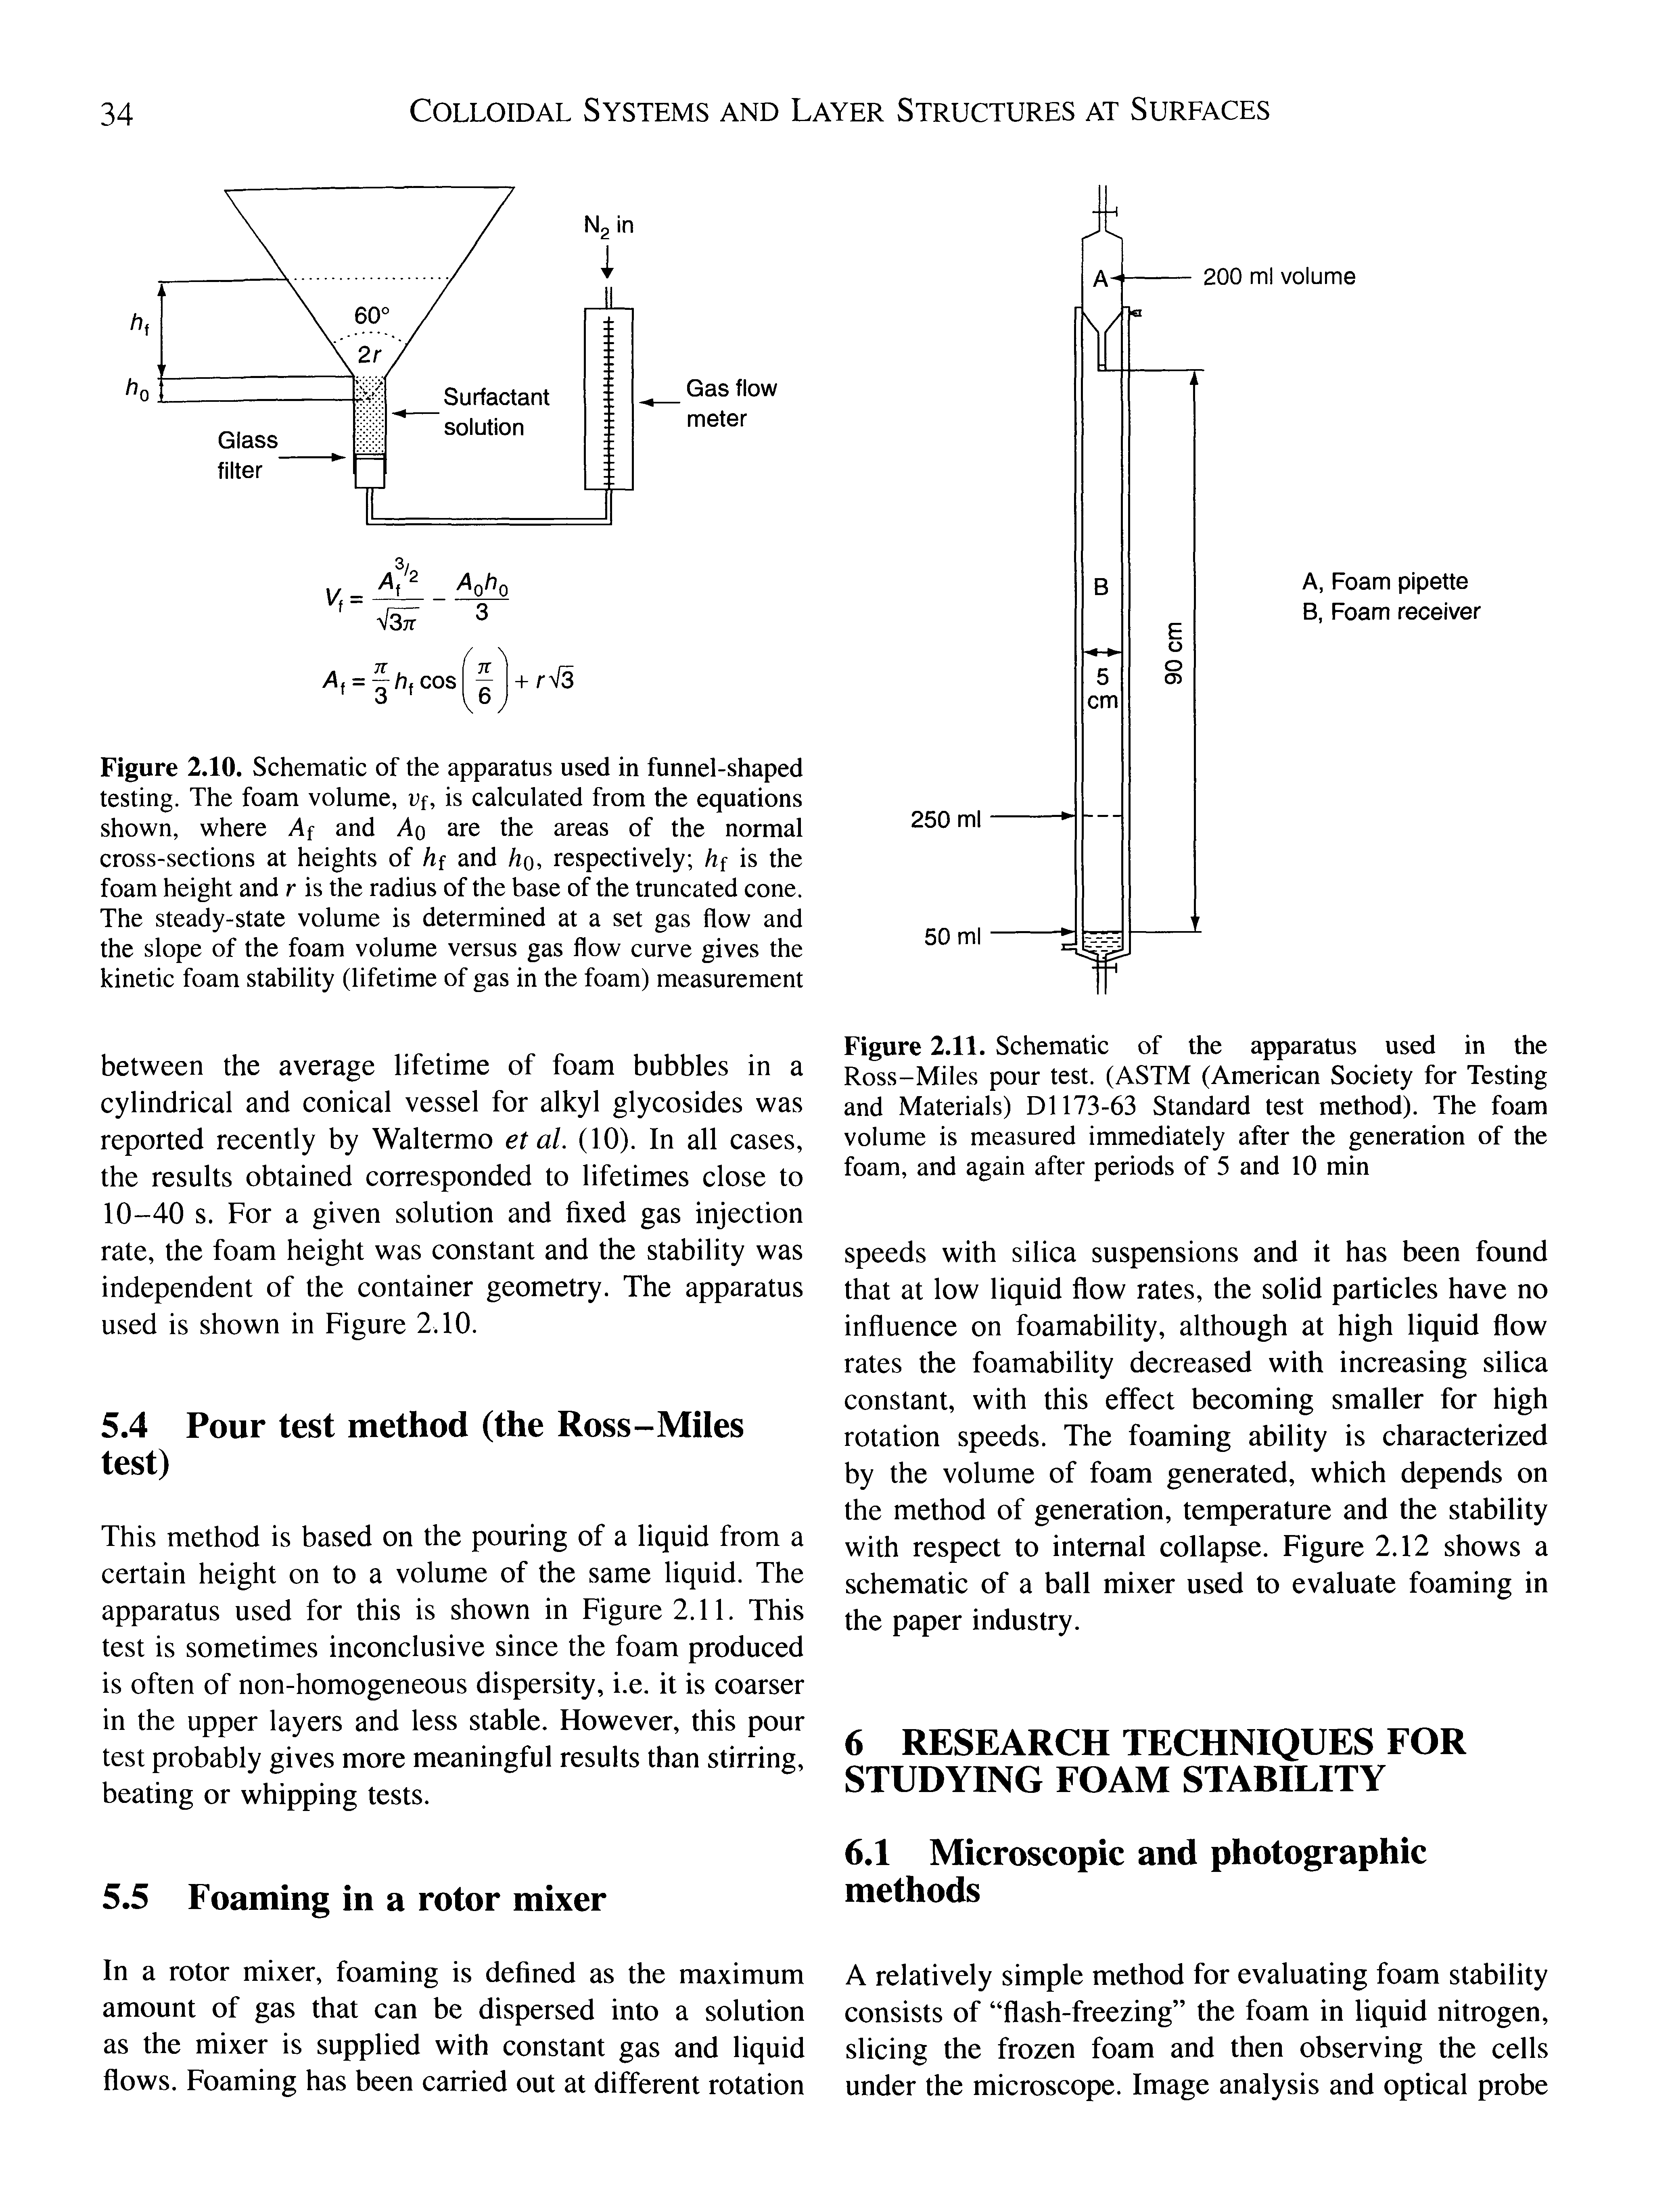 Figure 2.11. Schematic of the apparatus used in the Ross-Miles pour test. (ASTM (American Society for Testing and Materials) D1173-63 Standard test method). The foam volume is measured immediately after the generation of the foam, and again after periods of 5 and 10 min...